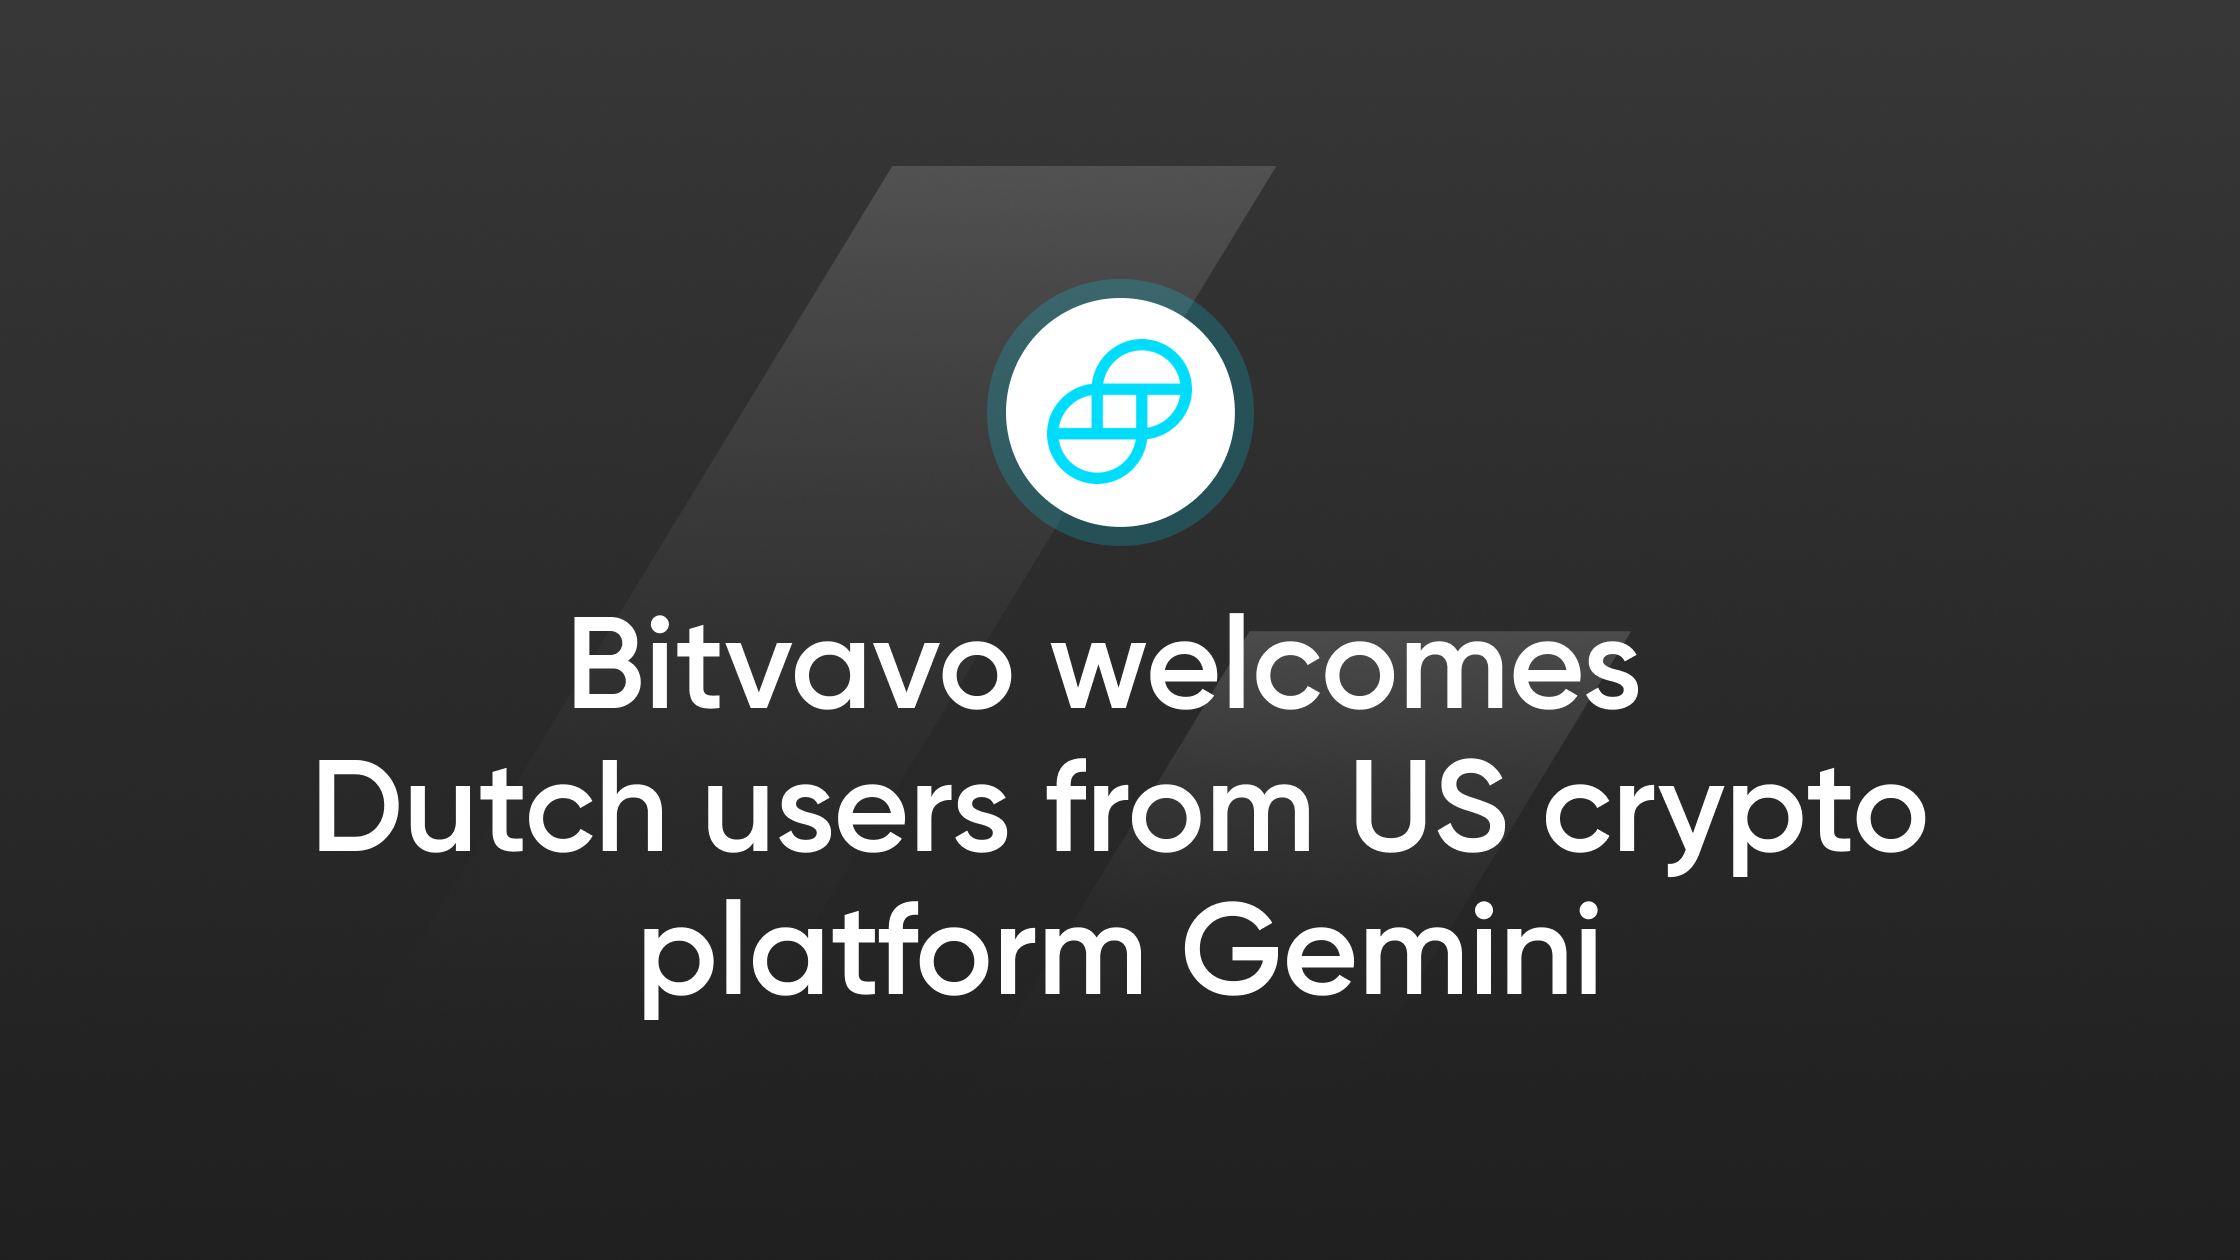 Bitvavo welcomes Dutch users from US crypto platform Gemini 